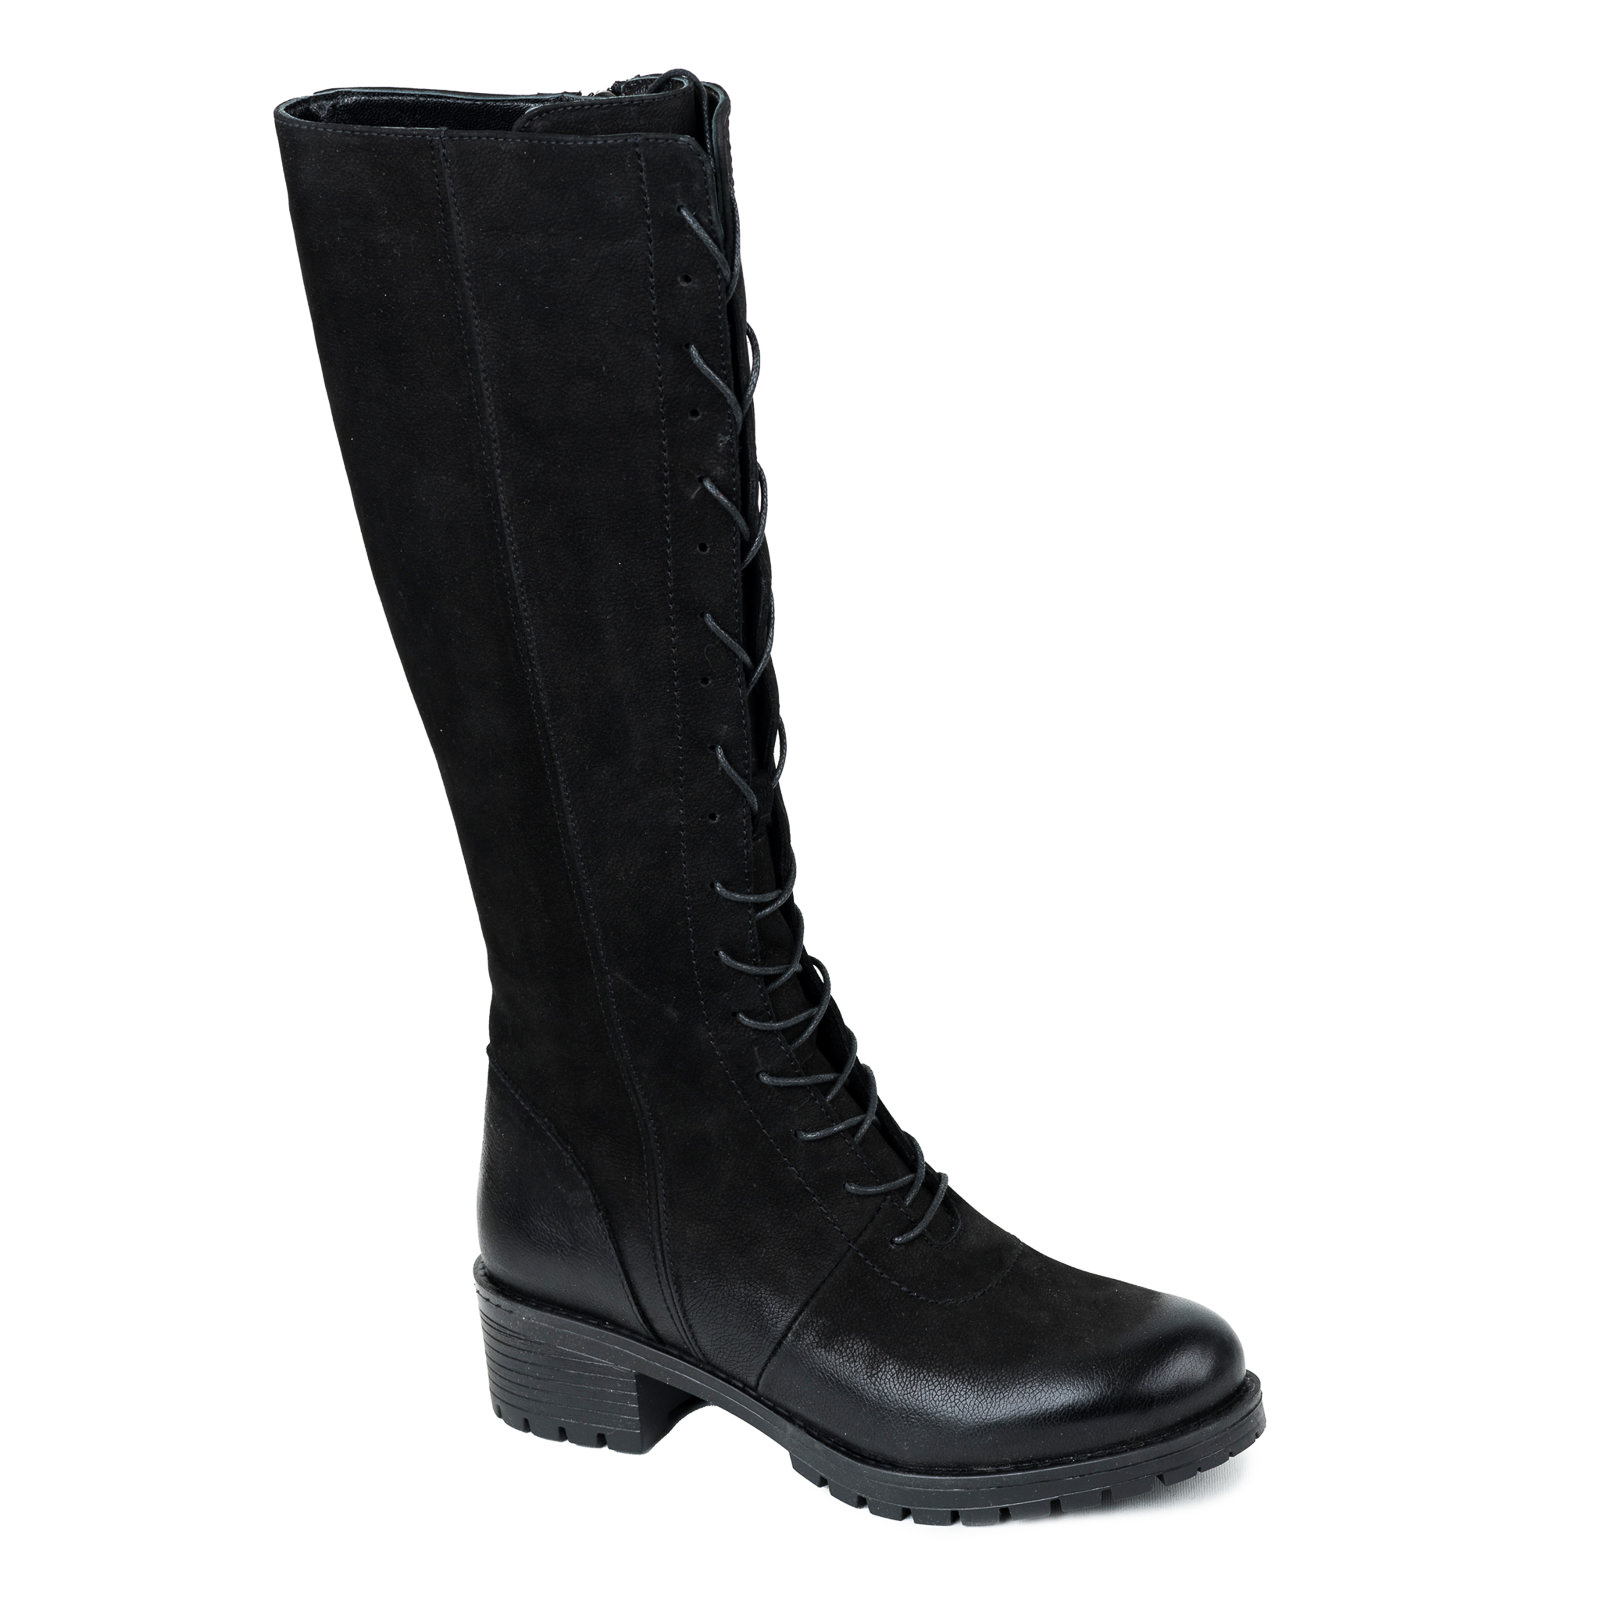 Leather boots B512 - BLACK